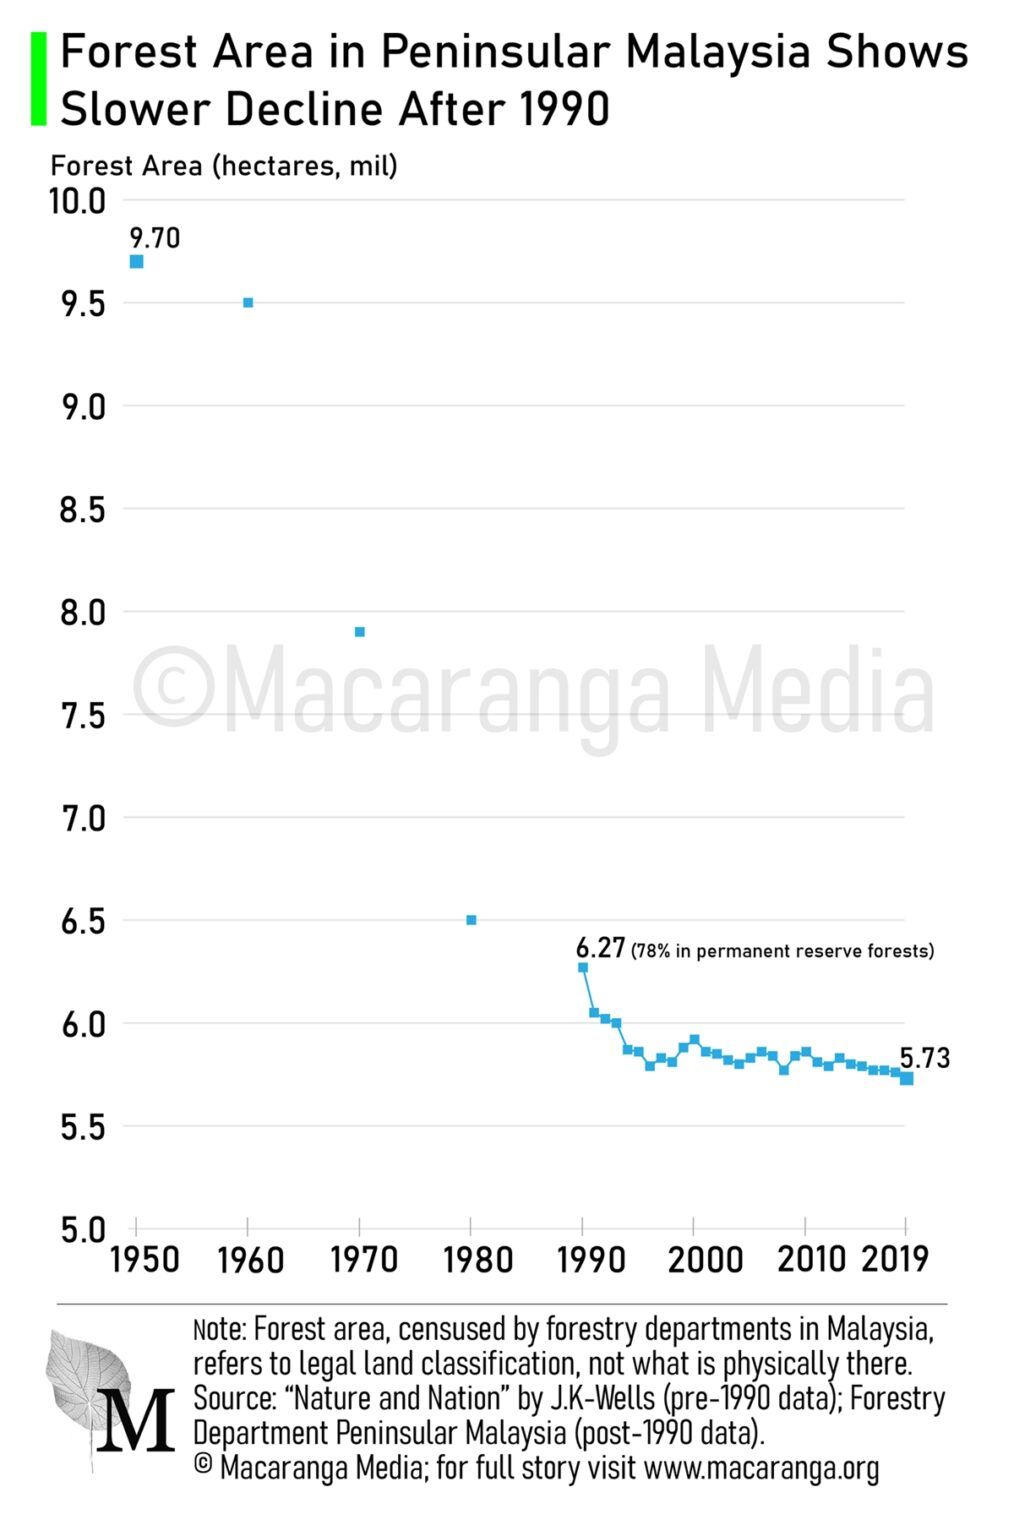 Figure 2: Forest area changes in Peninsular Malaysia showed huge drops since the 1950s but decline slowed since the 1990s.